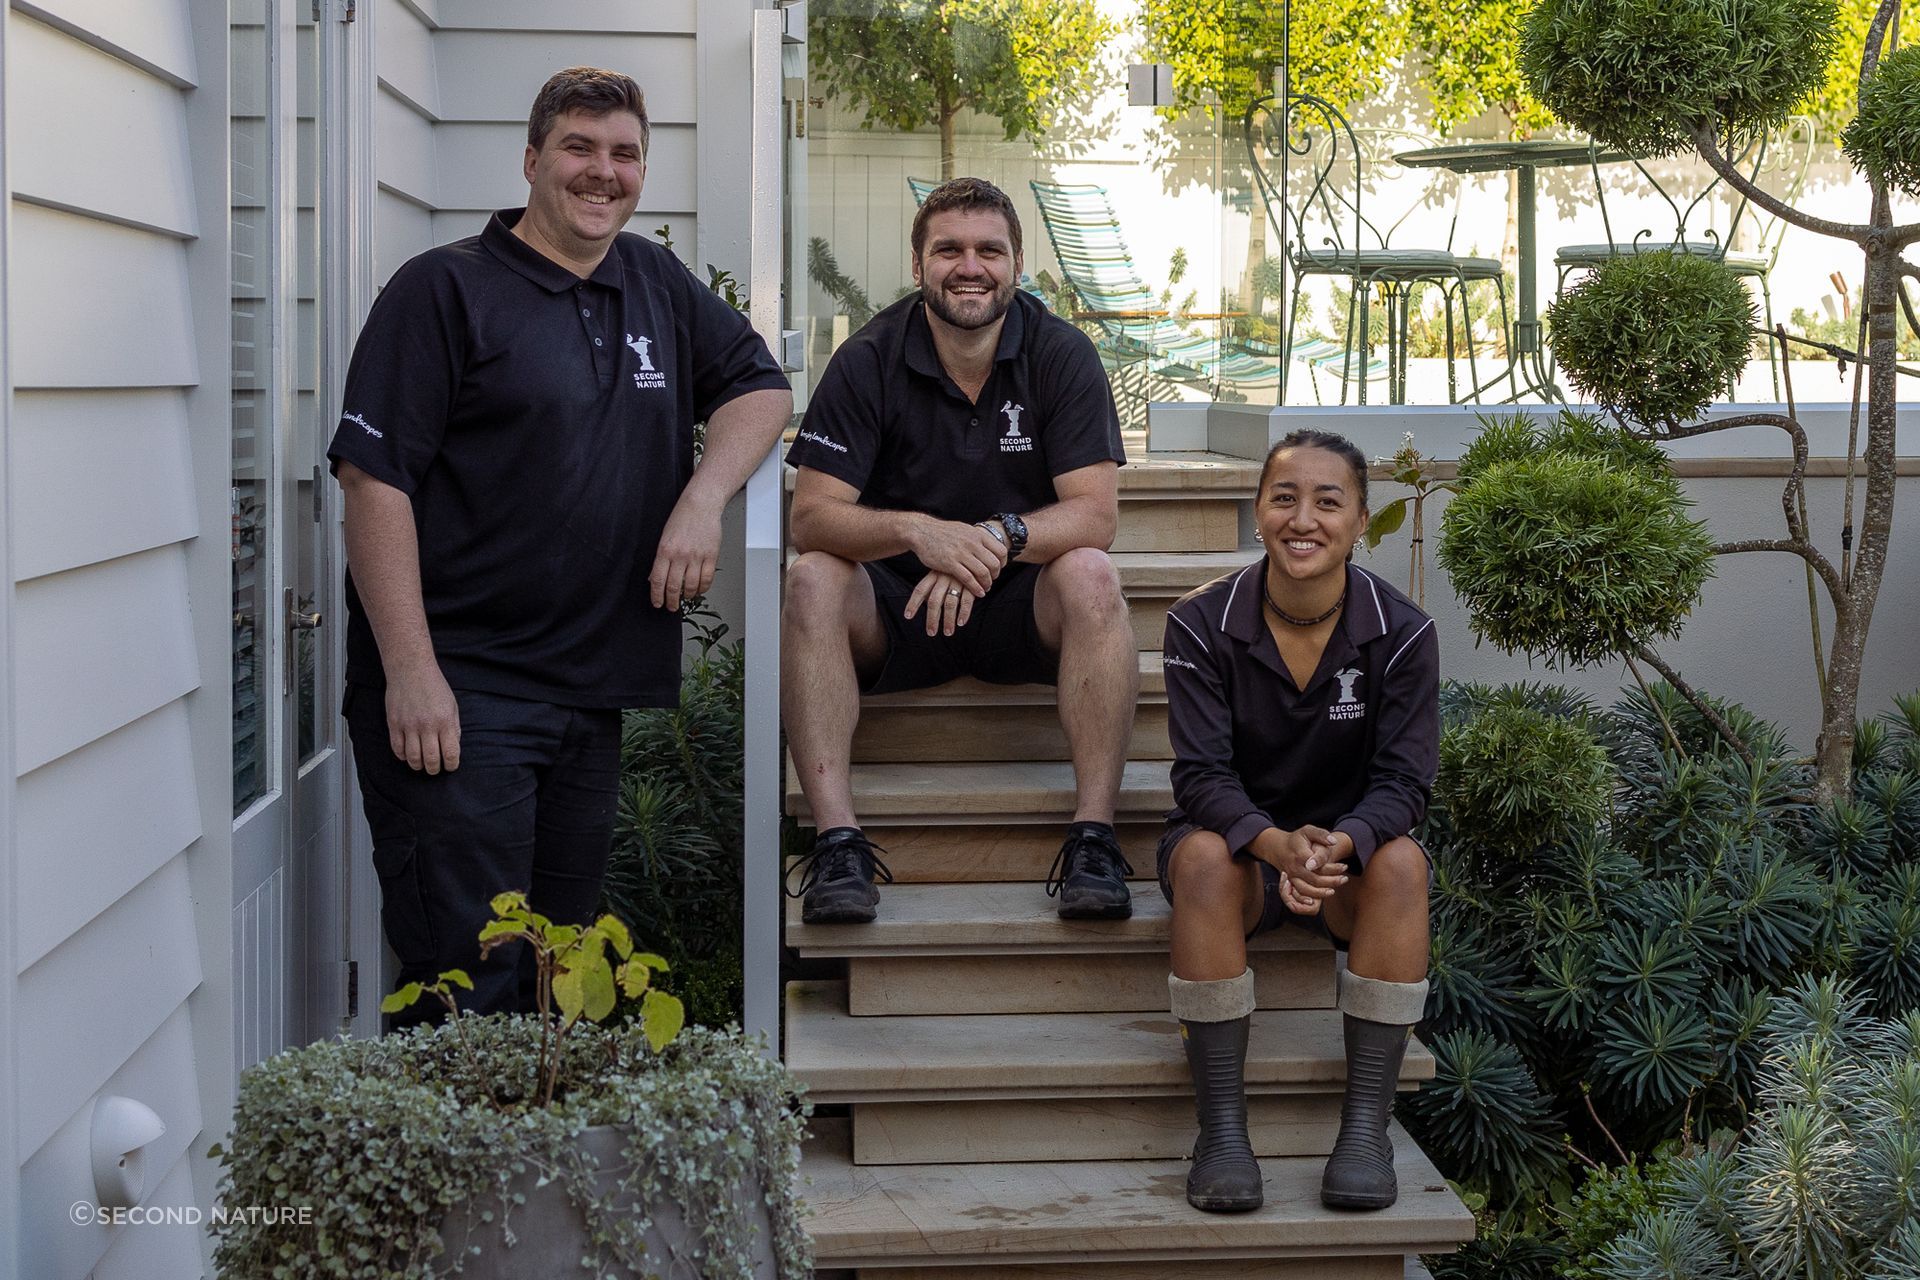 Second Nature team members pictured among the flourishing foliage of a completed project.